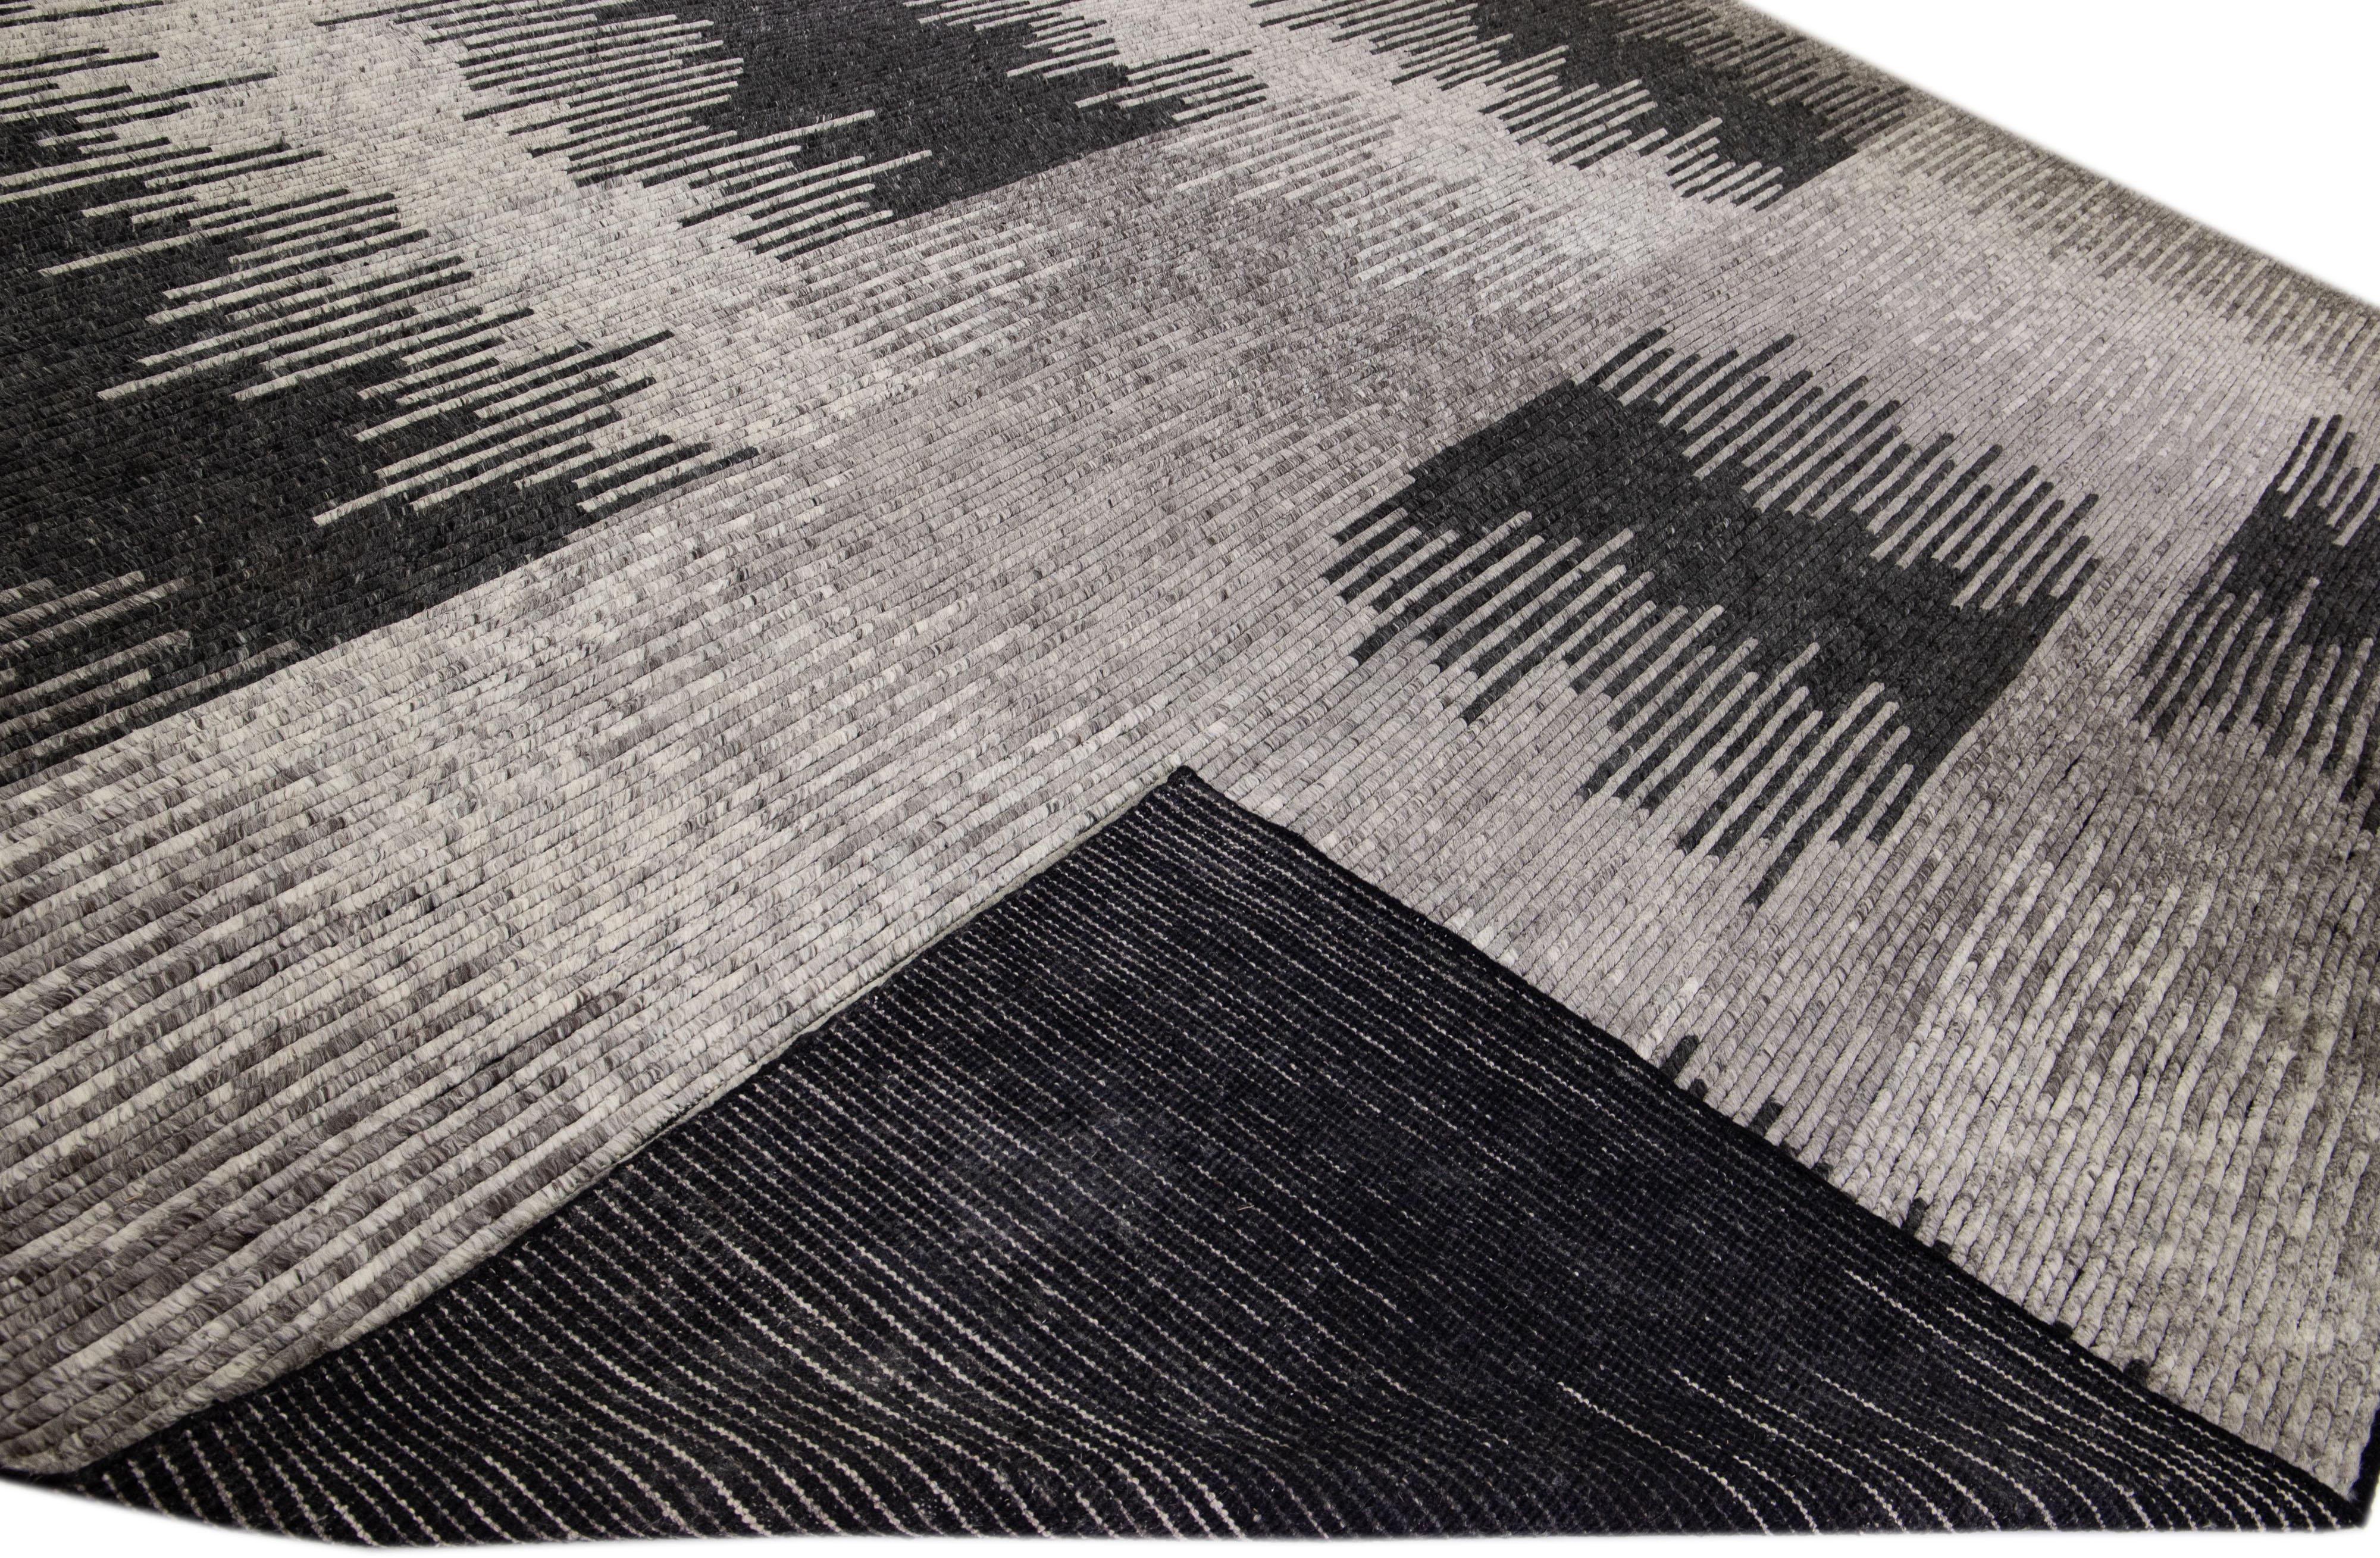 Beautiful modern Moroccan style hand-knotted wool rug with a gray- charcoal field in a gorgeous geometric abstract motif.

This rug measures: 16' x 18'

Our rugs are professional cleaning before shipping.